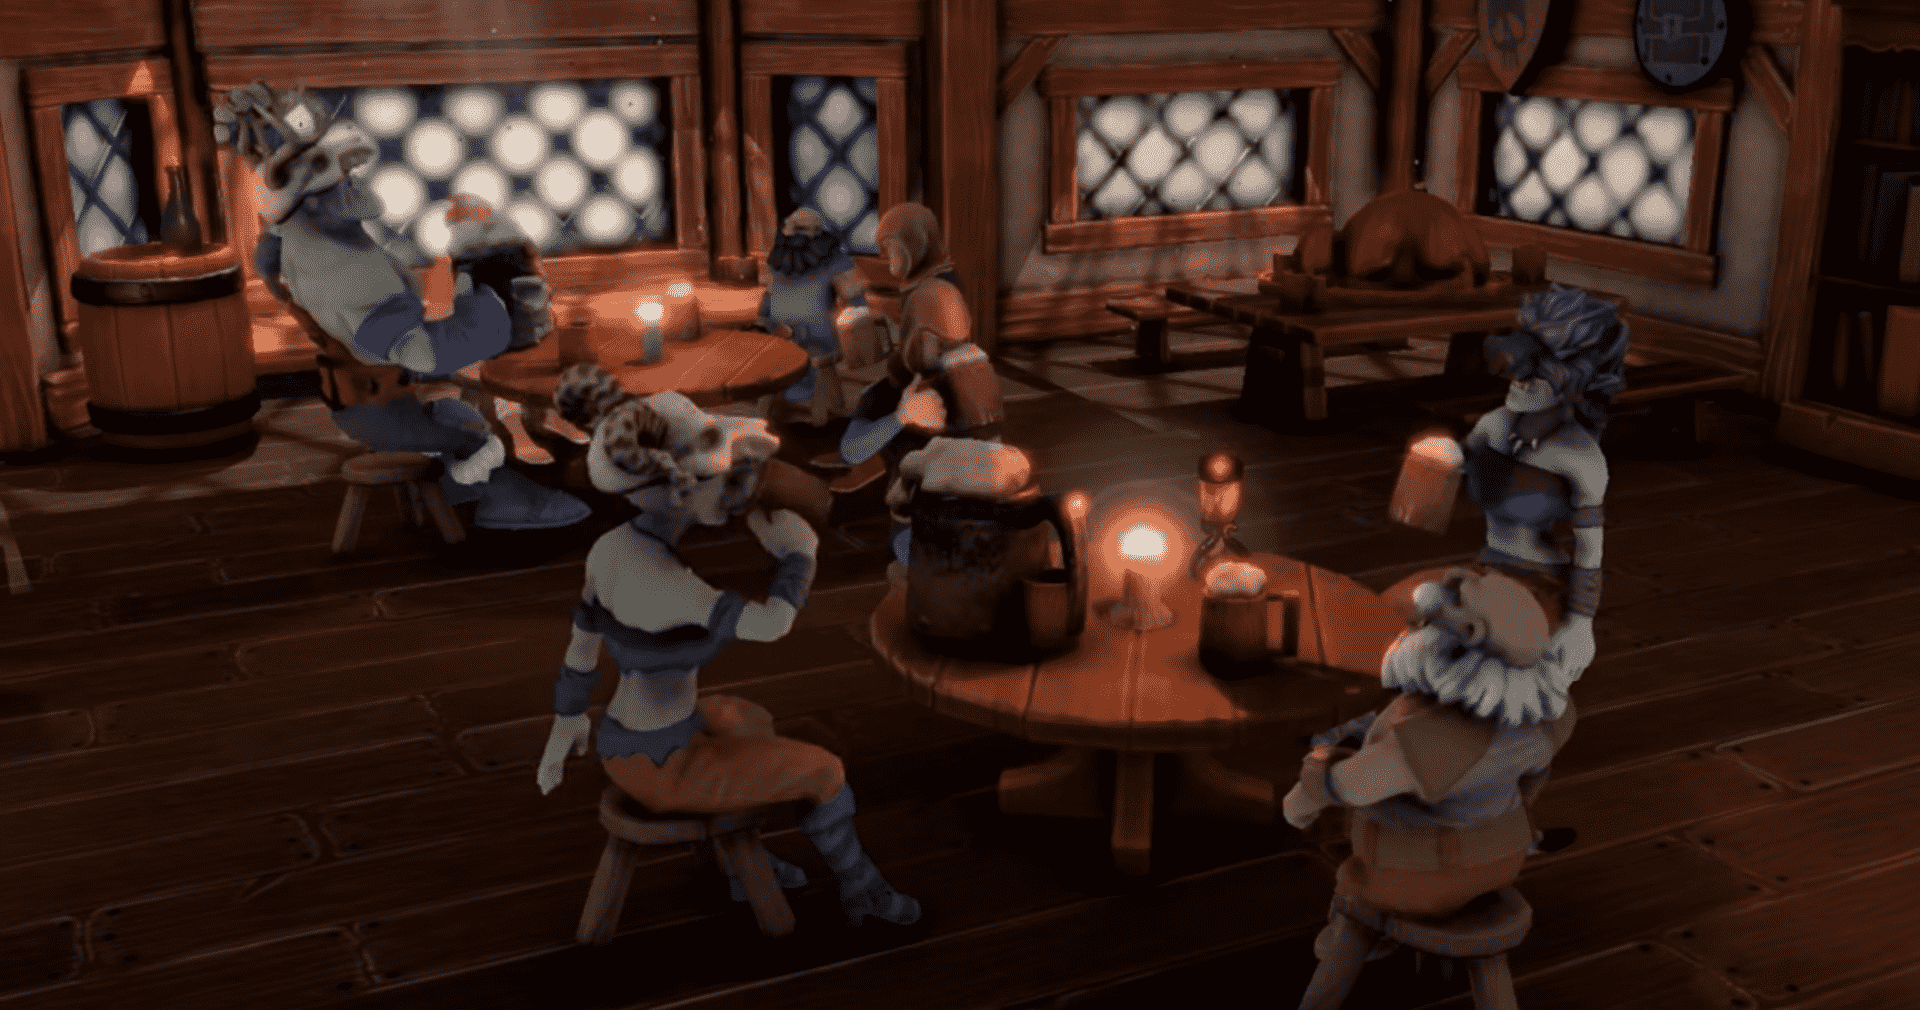 YOU CAN’T HAVE LEGENDARY ADVENTURERS AND HEROIC QUESTS WITHOUT AN ‘EPIC TAVERN’